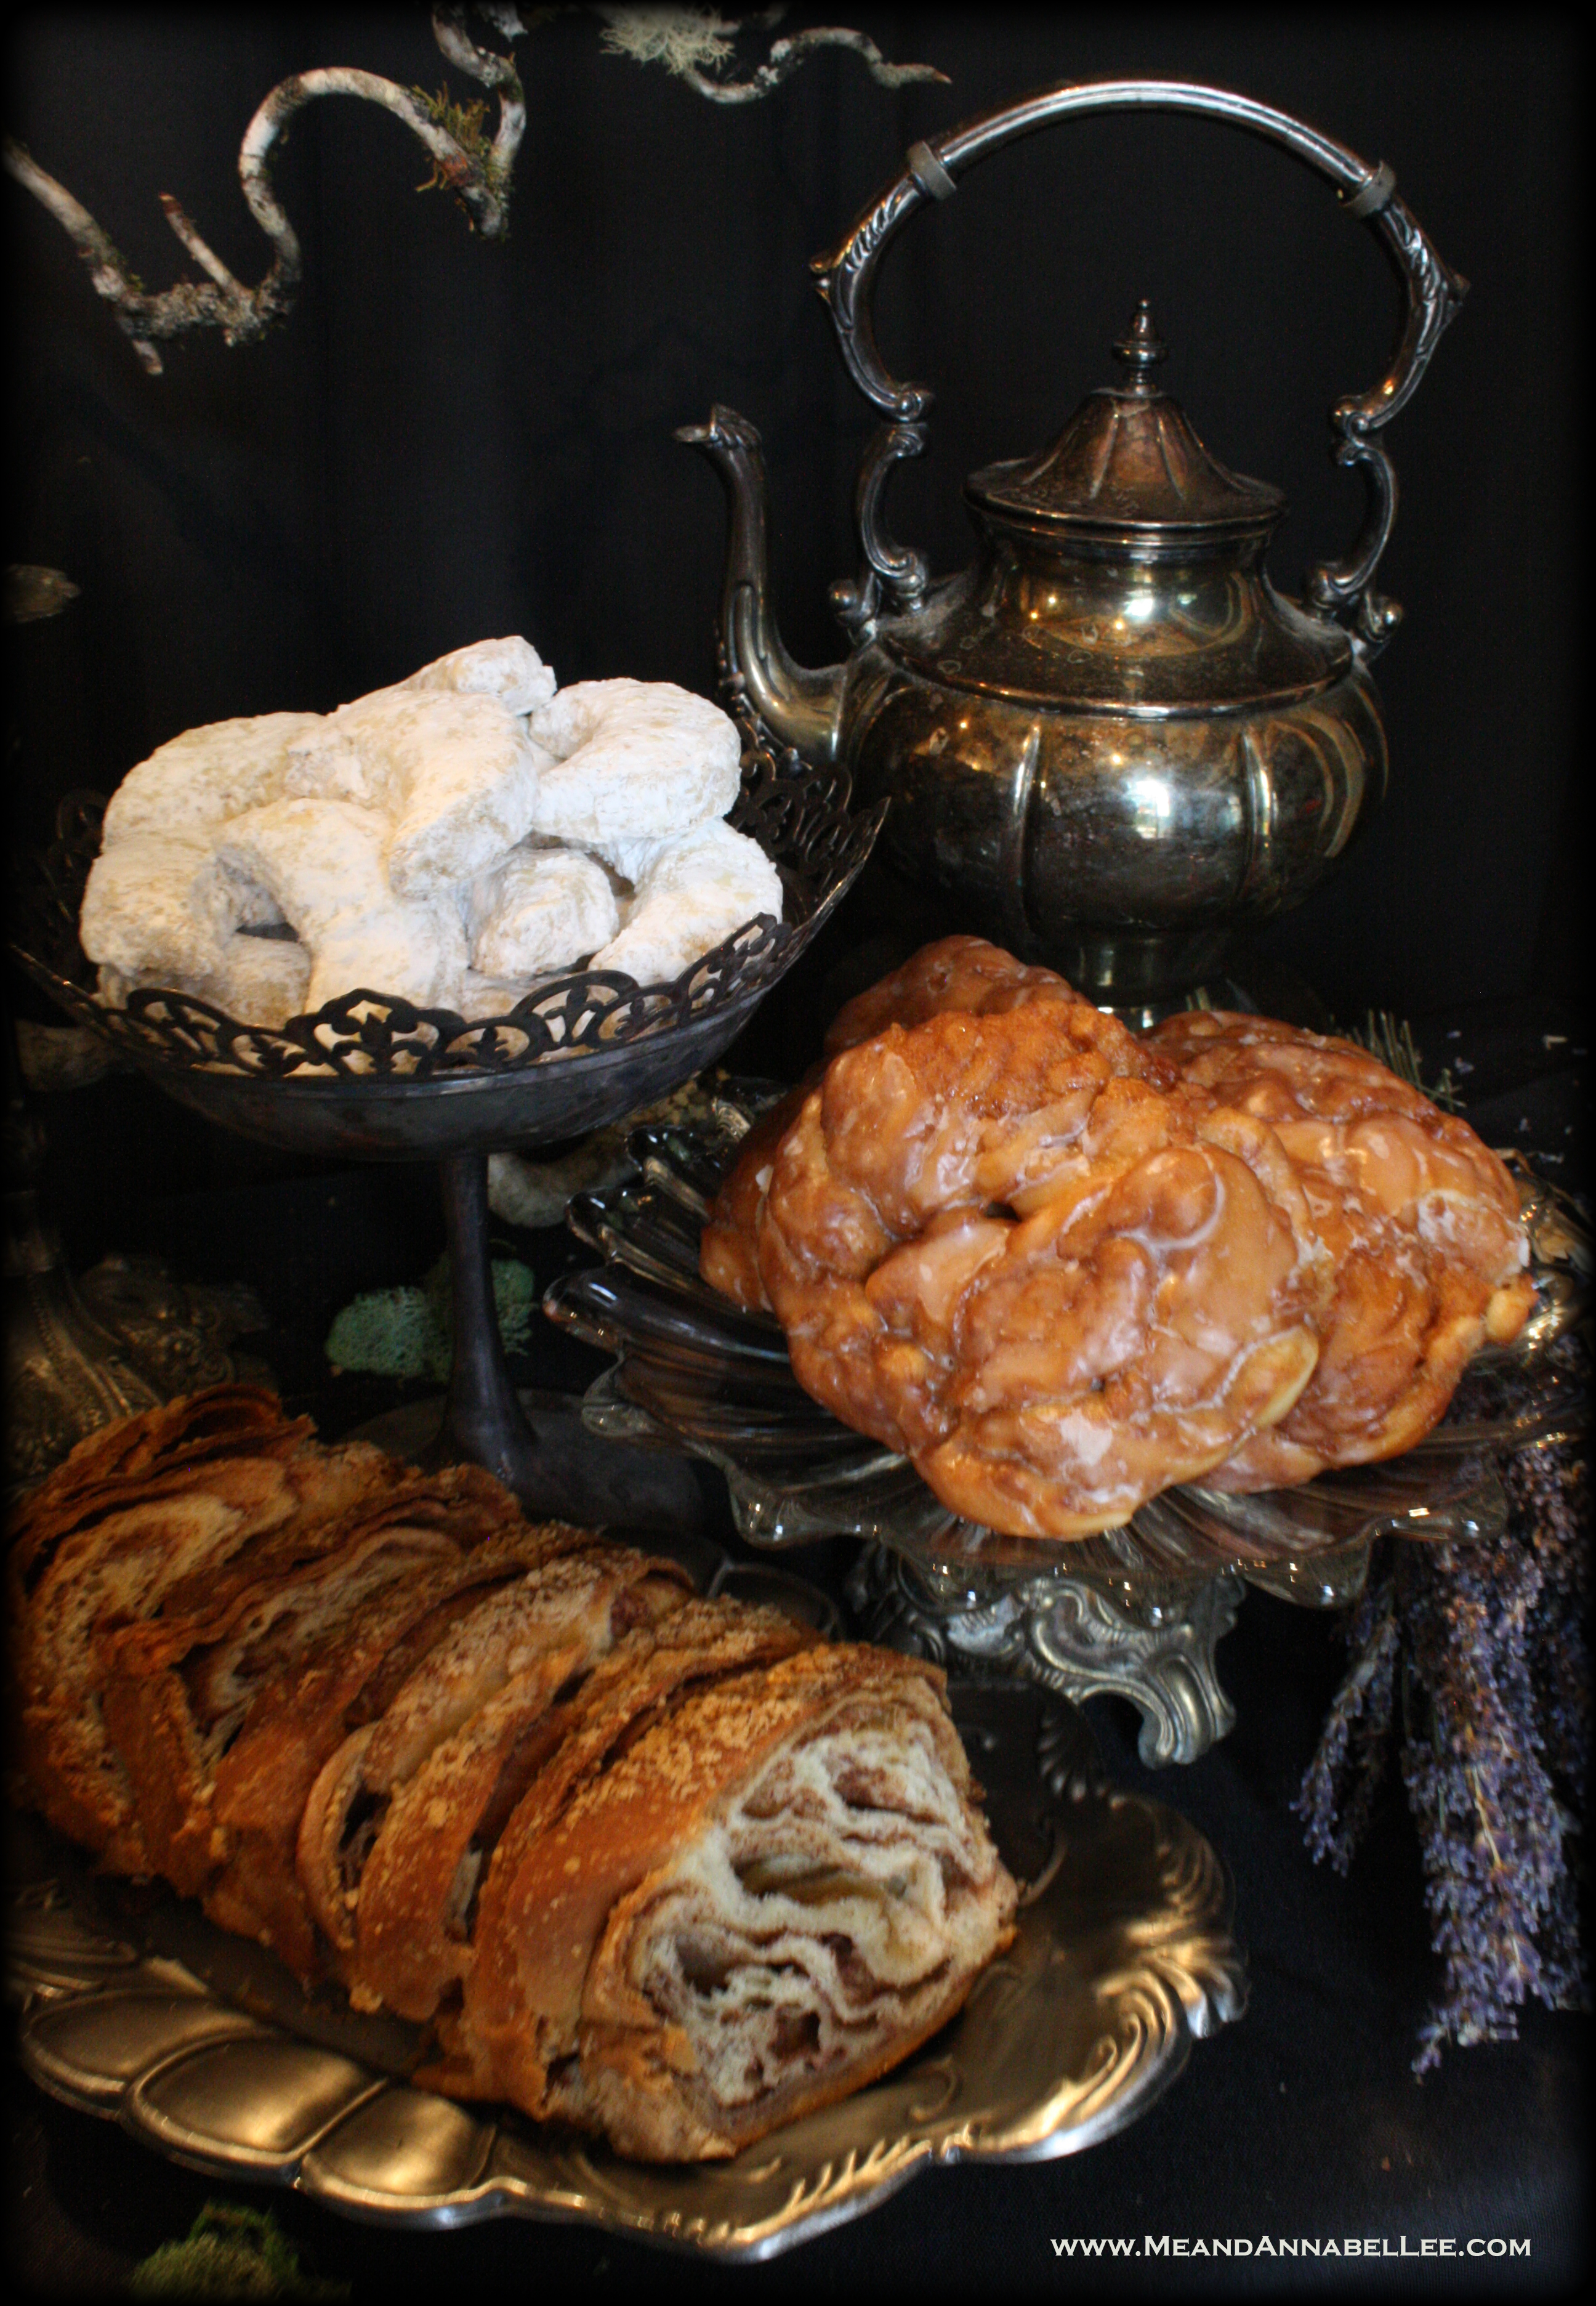 Witches Dinner Party | Dessert Bar | Almond Crescent Moon Cookies | Cinnamon Spiced Cake| Apple Fritters | Herbal Tea | Fall Flavors | www.MeandAnnabelLee.com